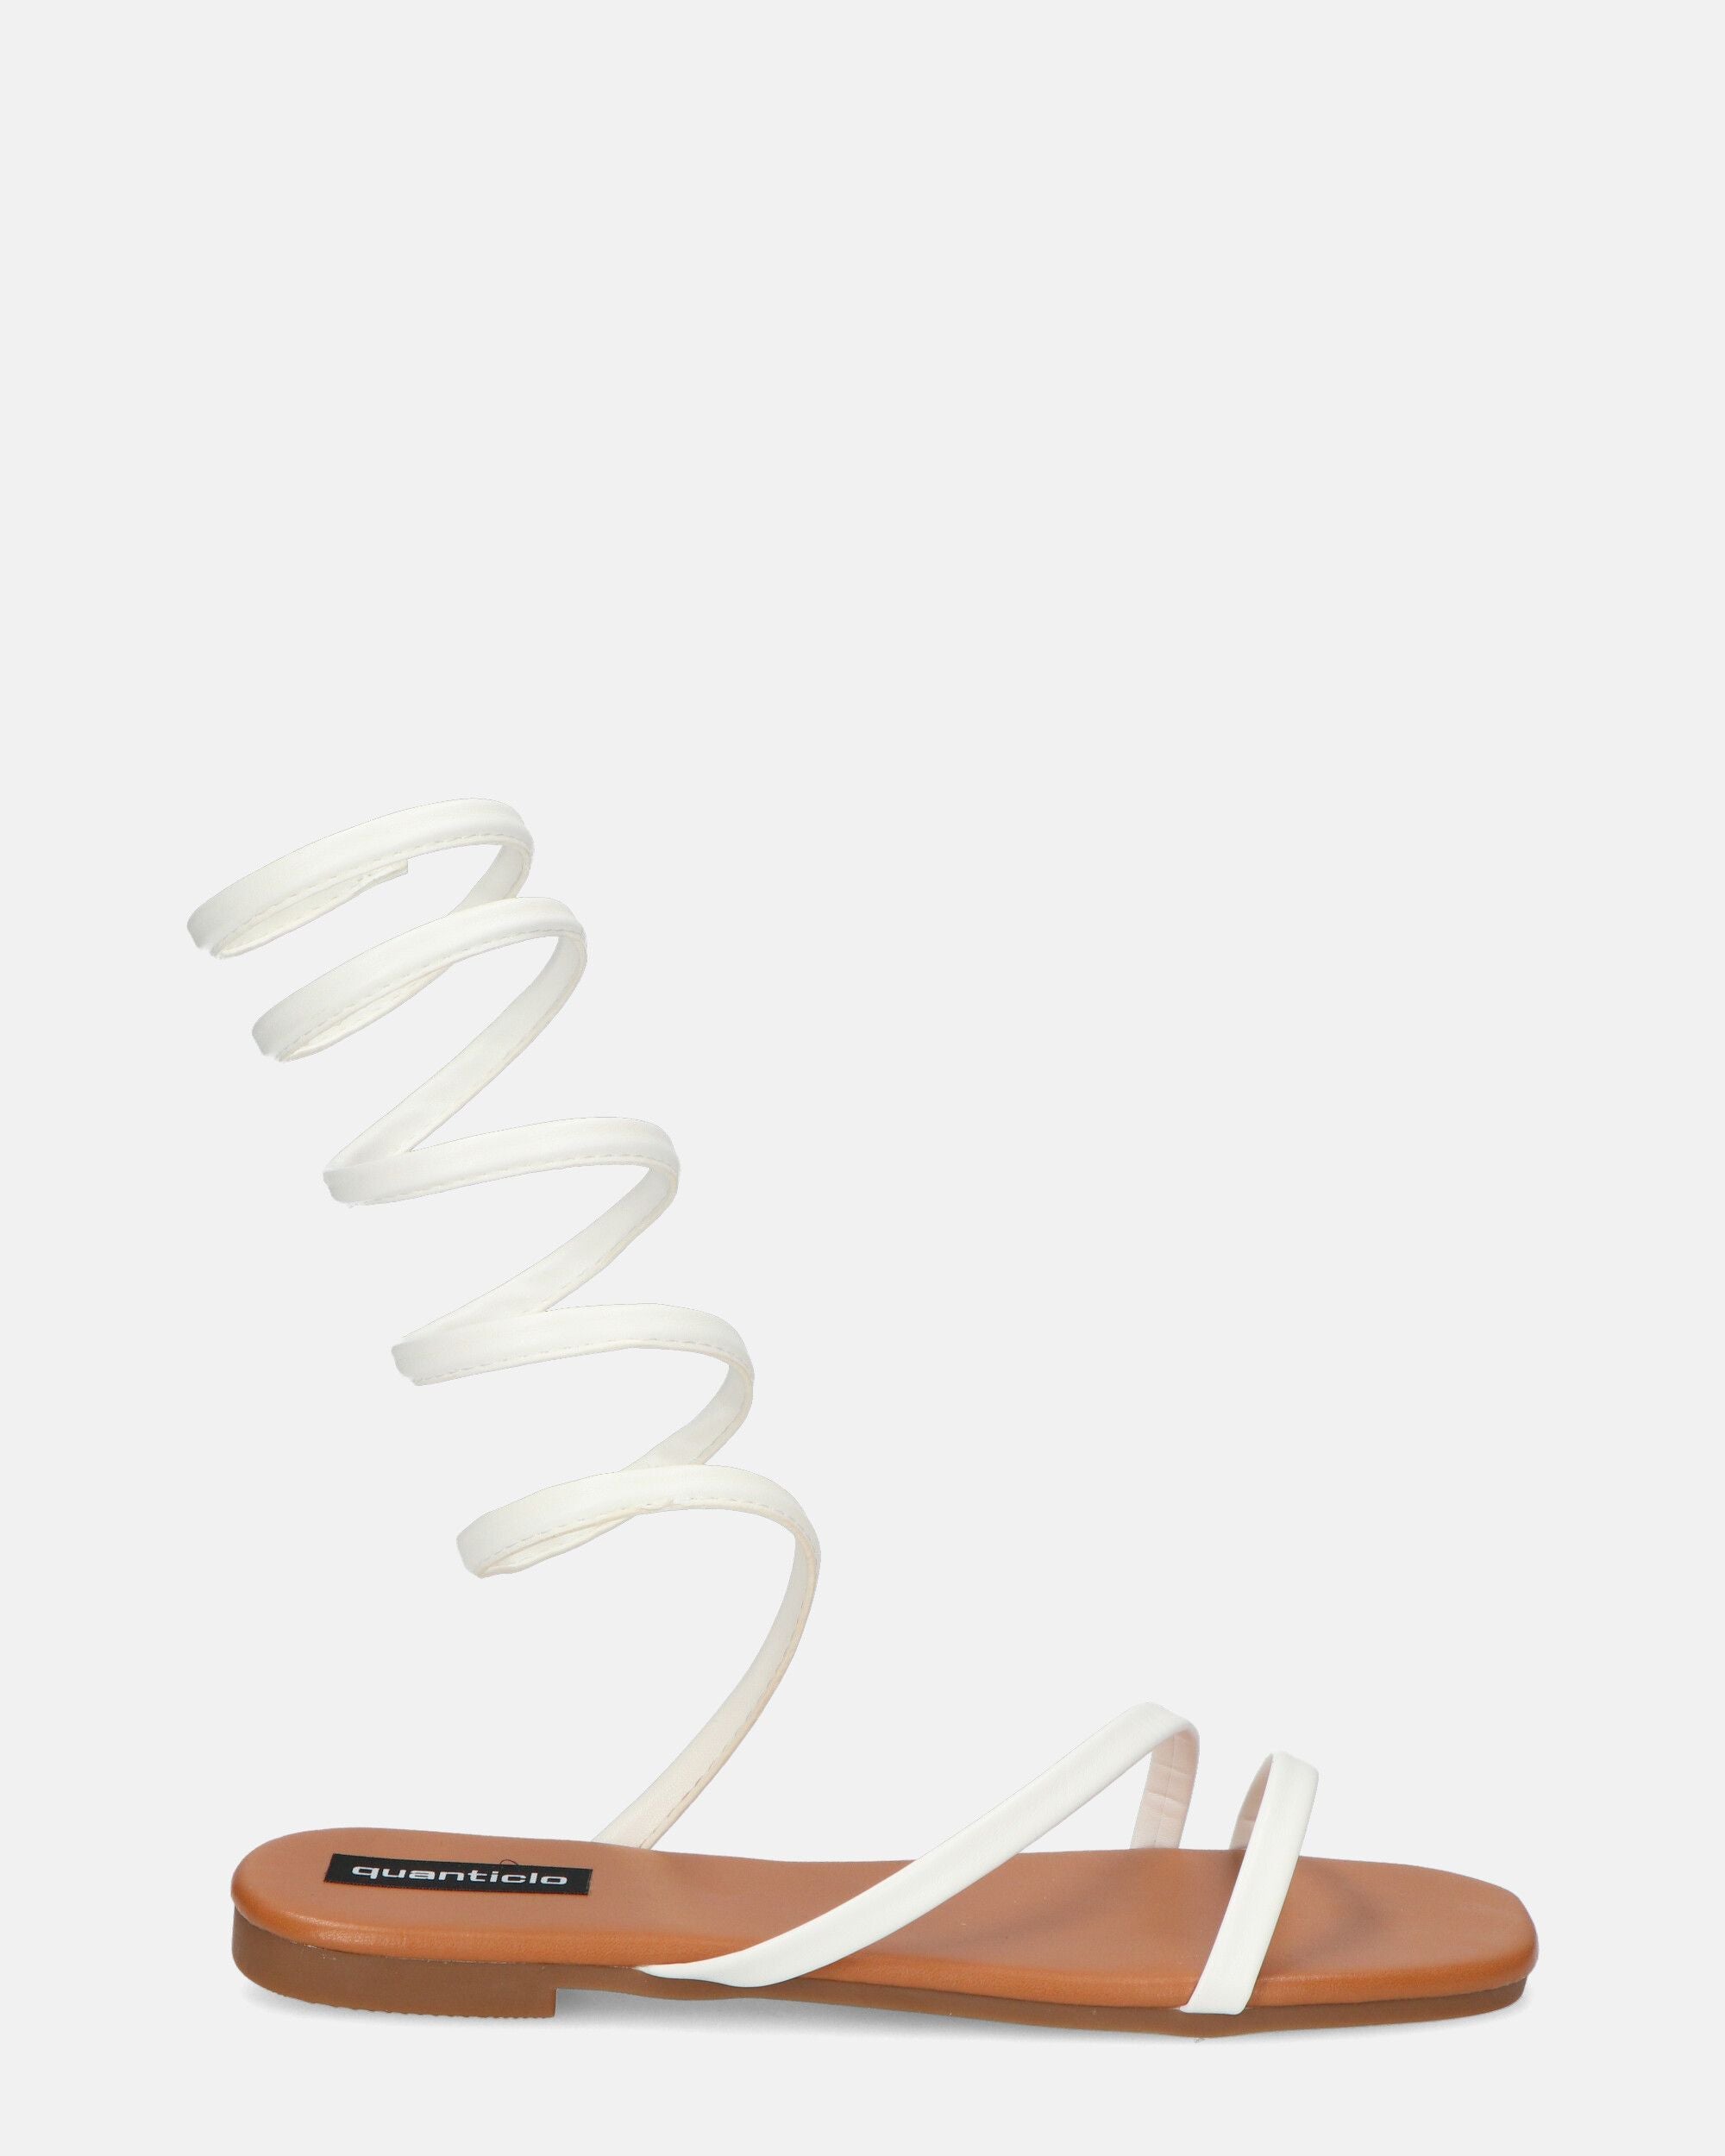 SIENNA - sandals with brown sole and white spiral